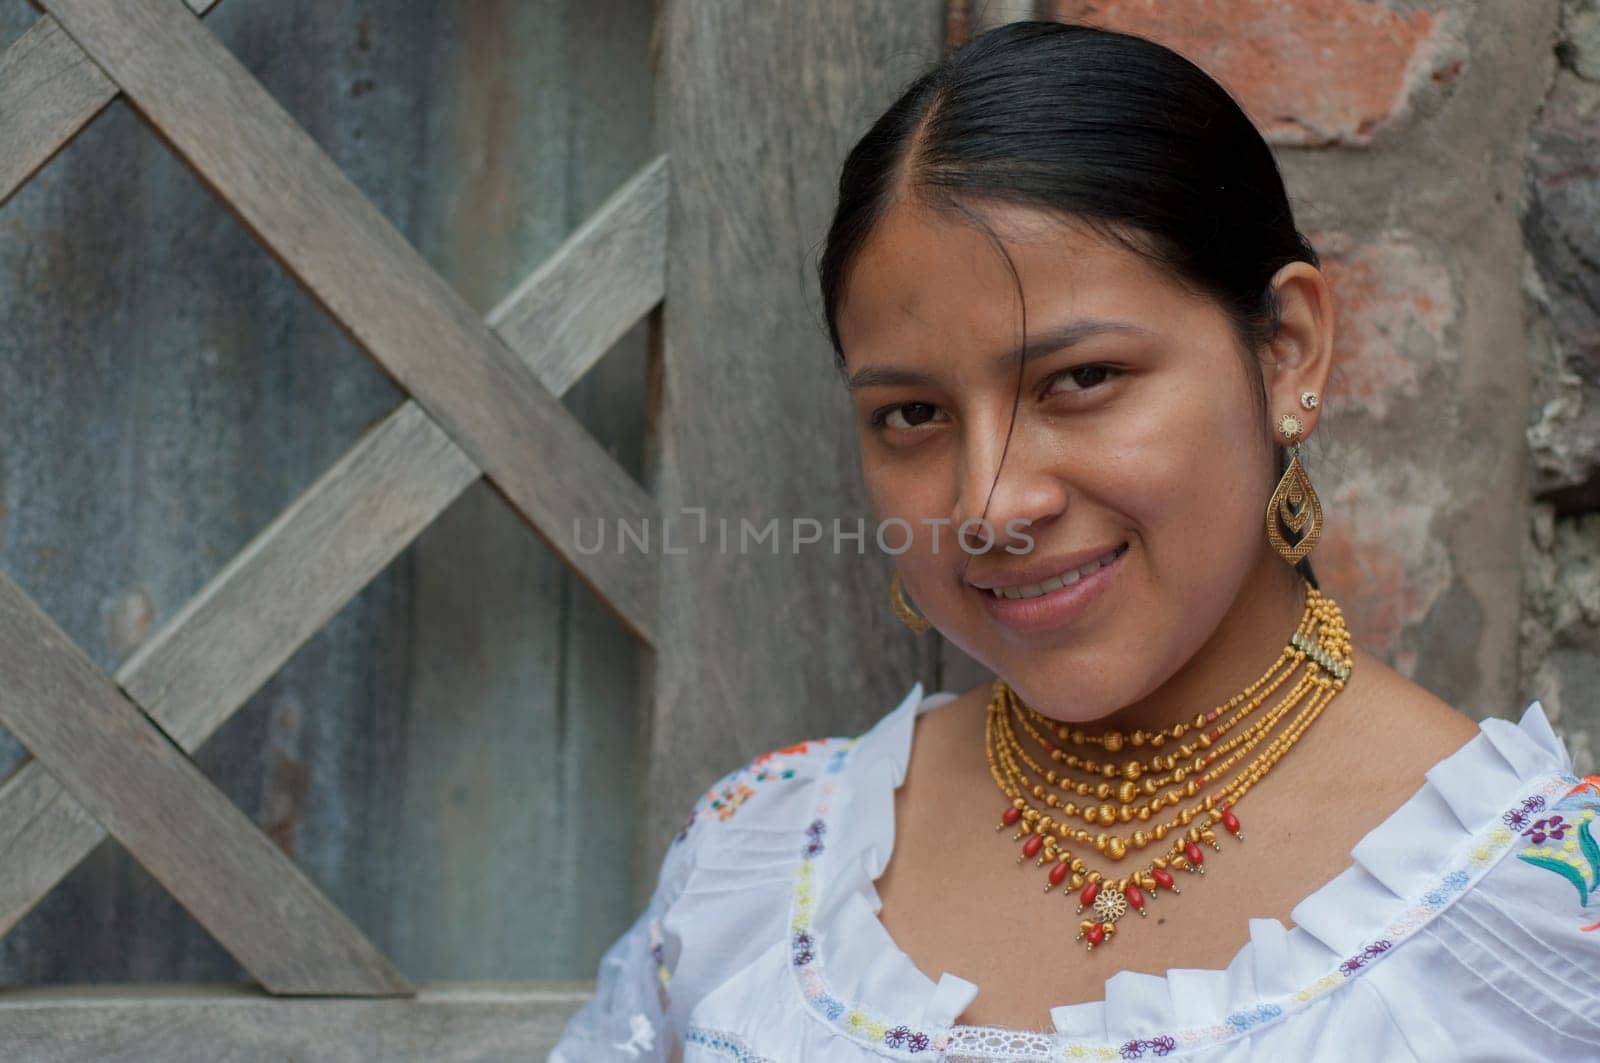 native latin america girl looking at camera and smiling wearing traditional dress of her culture and gold earrings and necklaces by Raulmartin